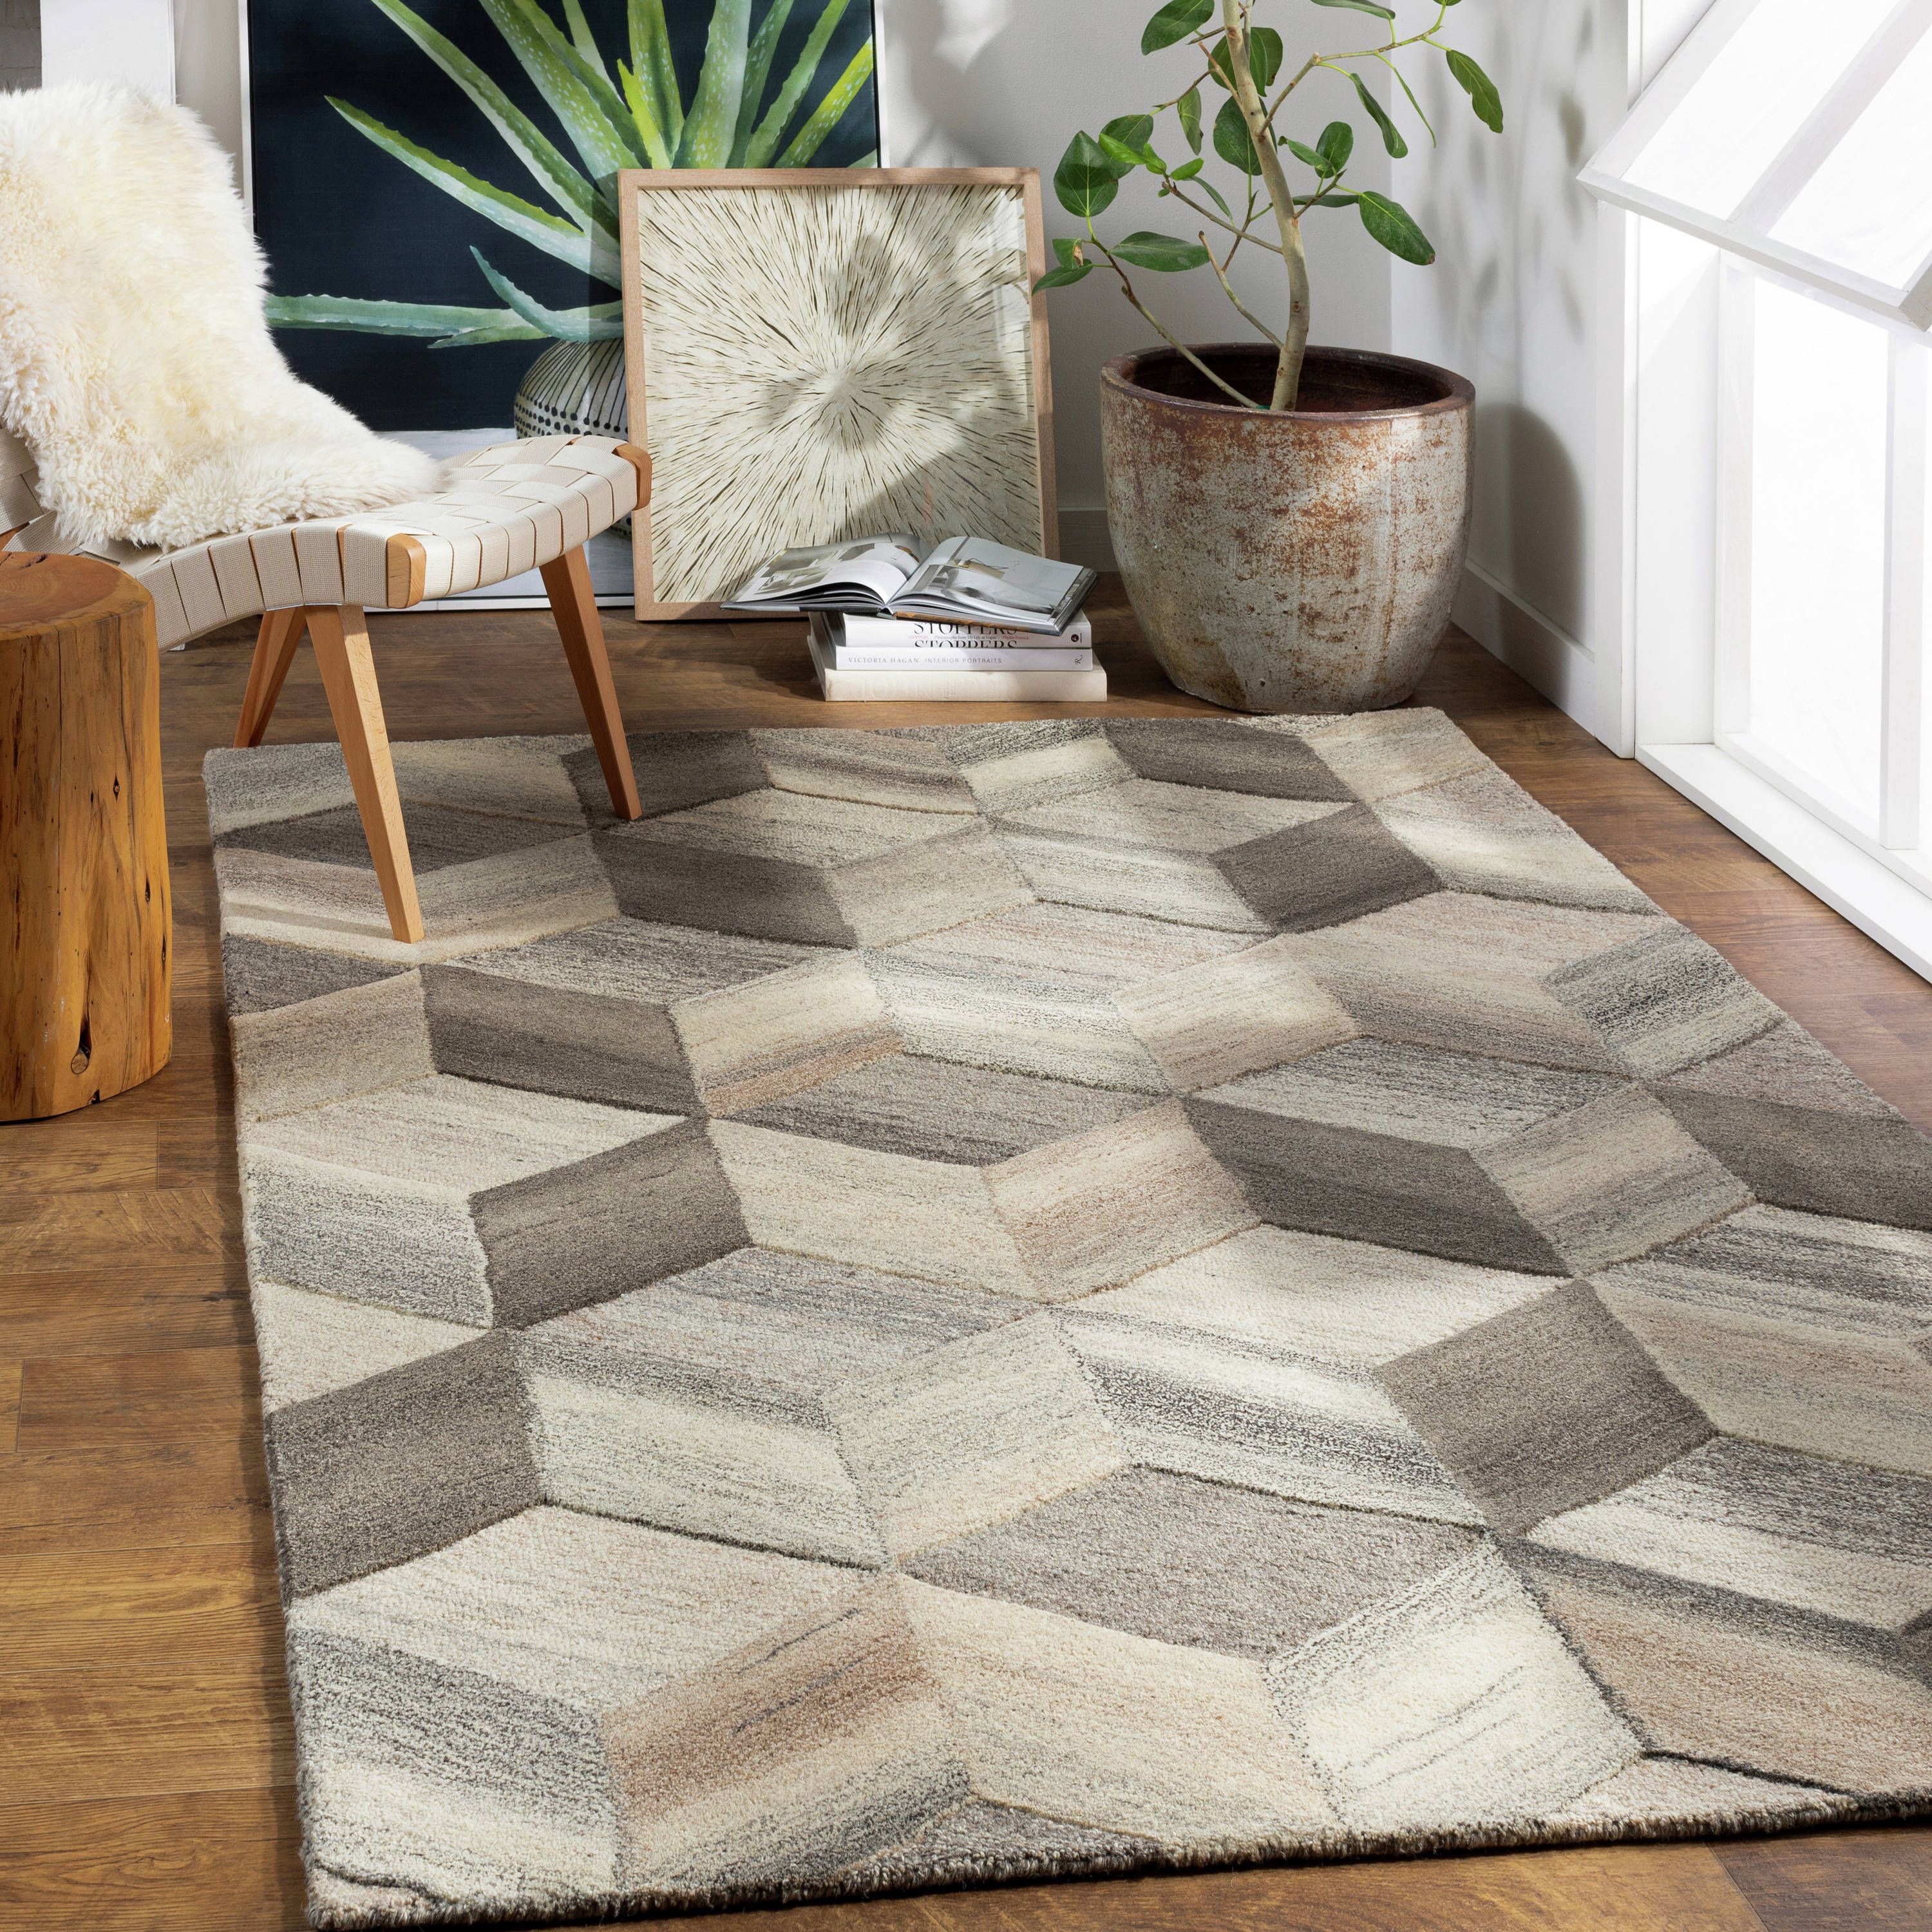 Surya 8 X 8 Wool Taupe Square Indoor Geometric Mid Century Modern Area Rug  In The Rugs Department At Lowes Pertaining To Modern Square Rugs (View 12 of 15)